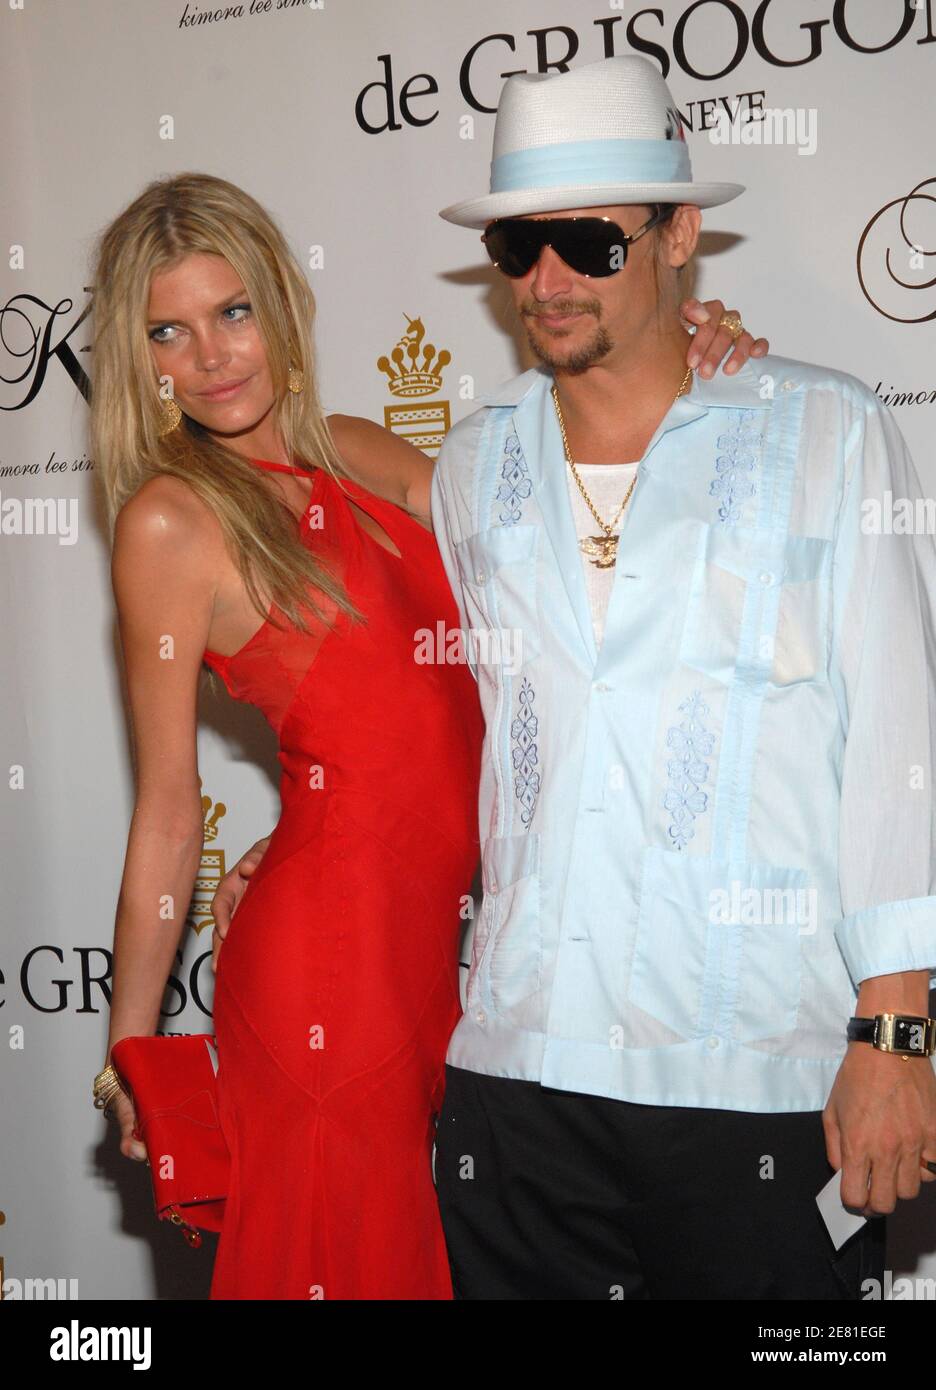 Musician Kid Rock (R) and girlfriend May Andersen attend the De Grisogono party at Eden Rock during the 60th International Cannes Film Festival on May 22, 2007 in Cap d'Antibes, France. Photo by Hahn-Nebinger-Orban/ABACAPRESS.COM Stock Photo